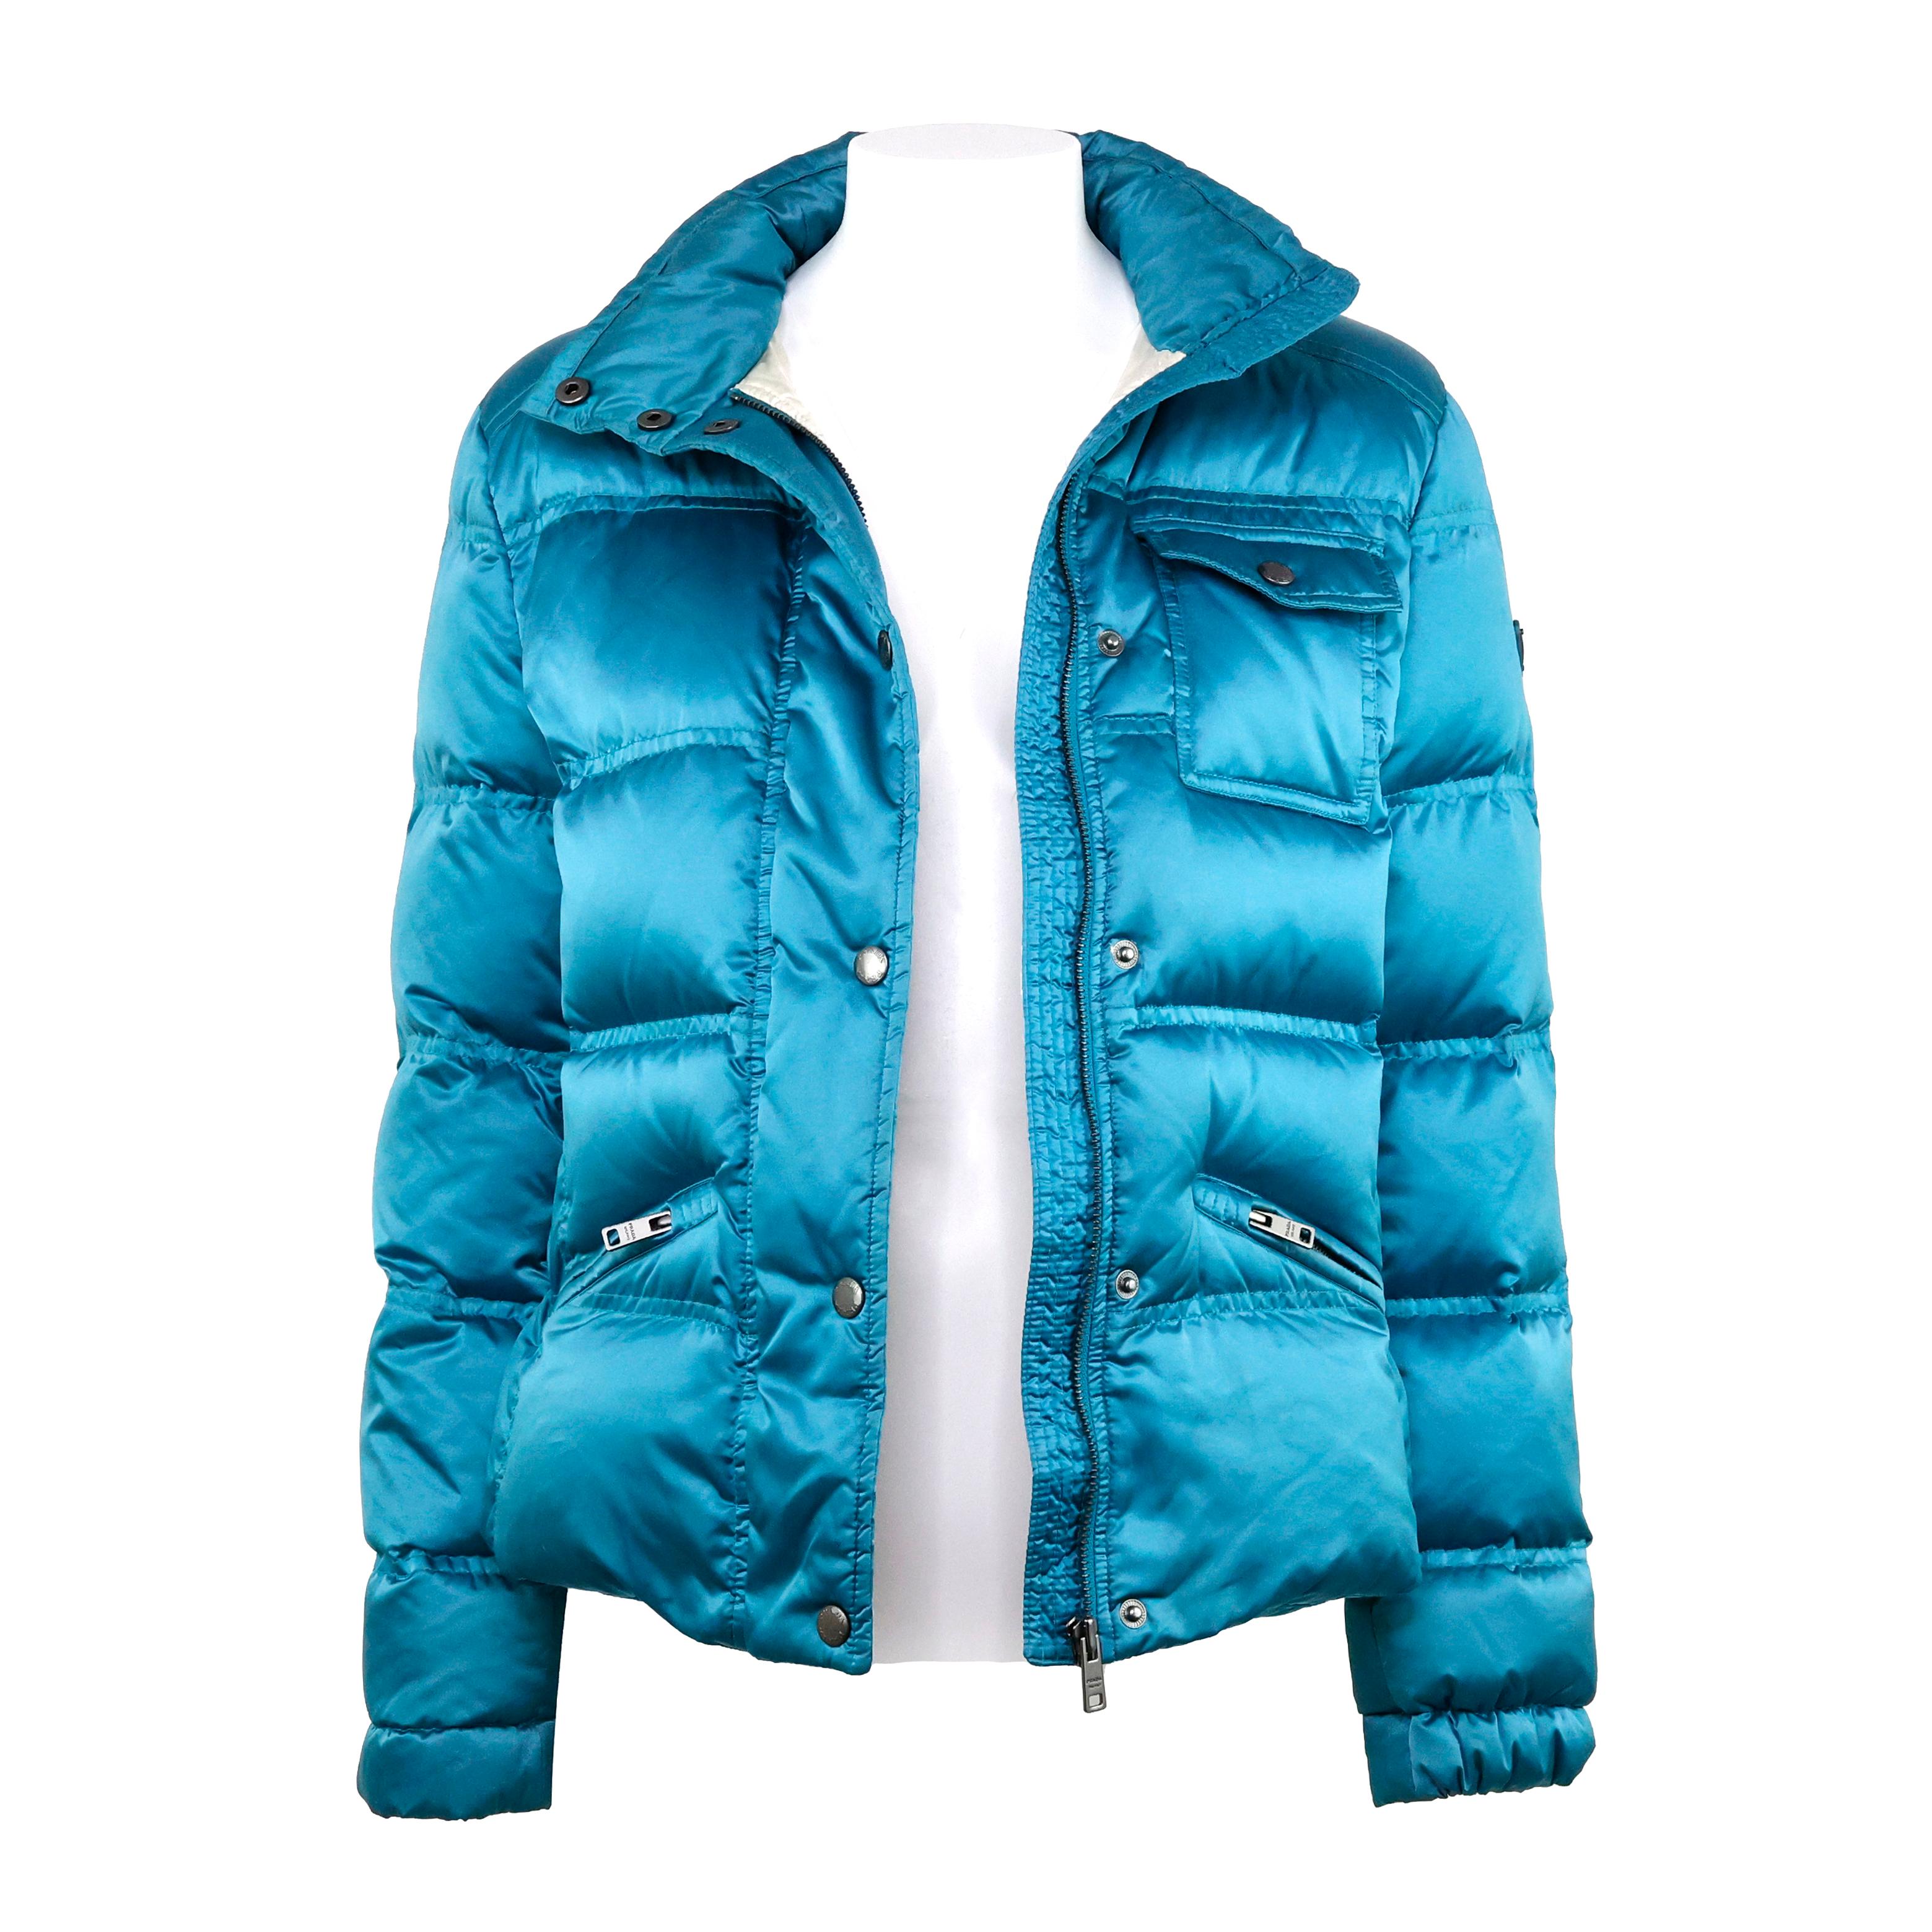 Blue Prada Triangle Logo Puffer Jacket in Turquoise Satin For Sale